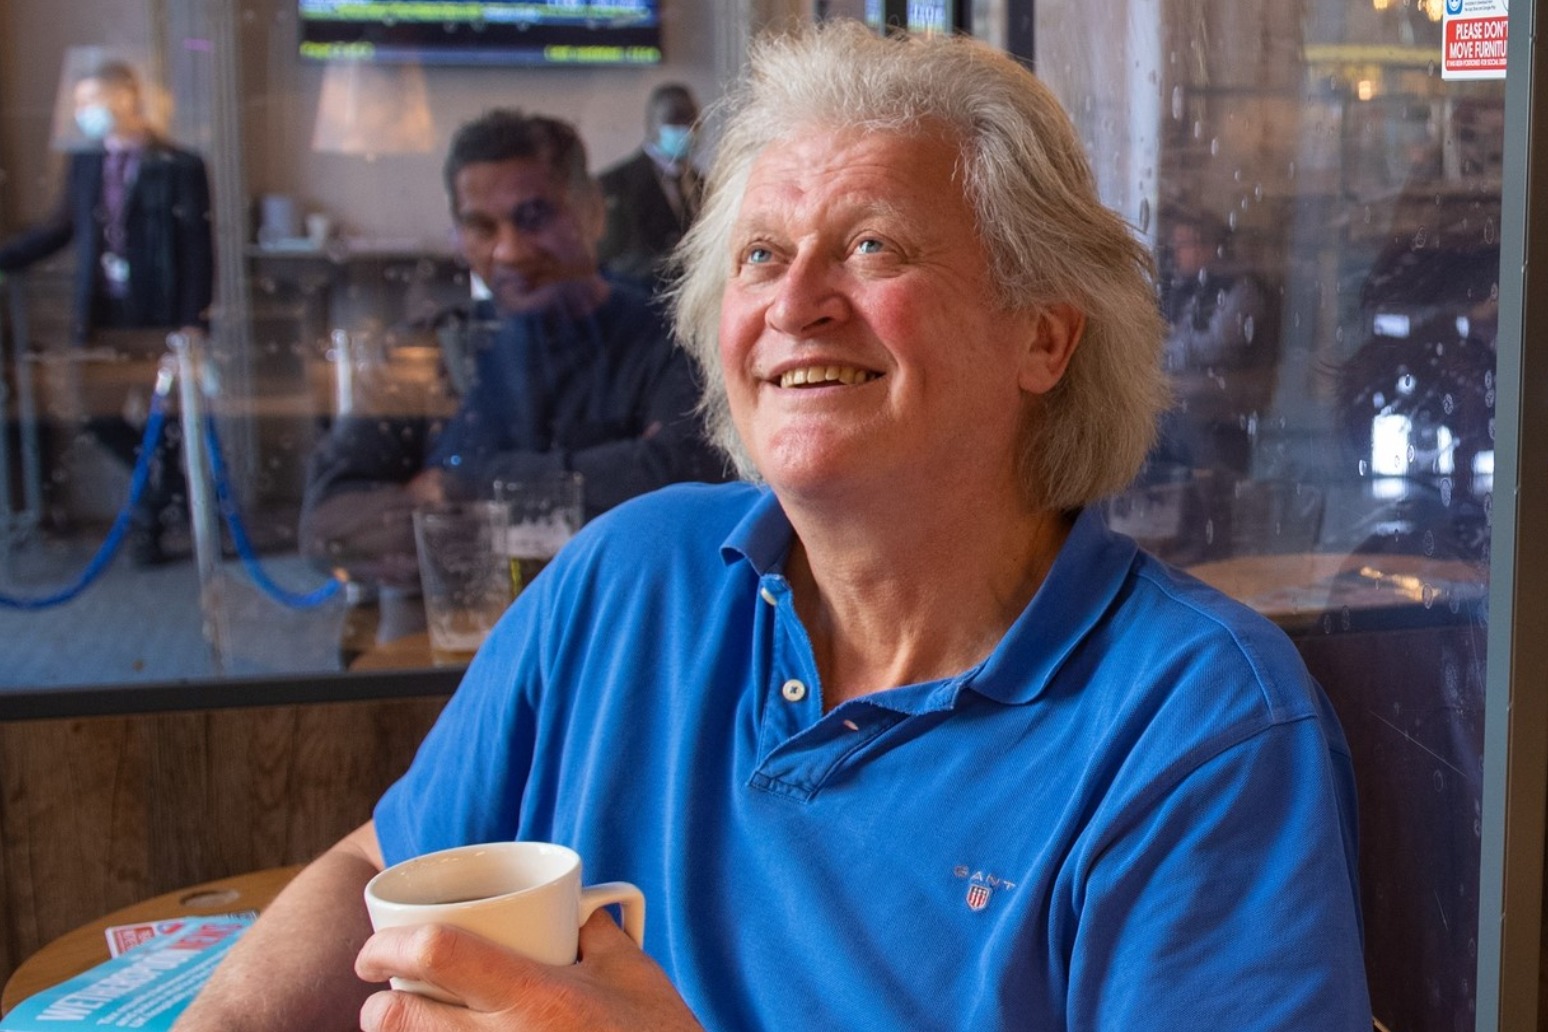 Wetherspoon founder and boss to be knighted in New Year honours 